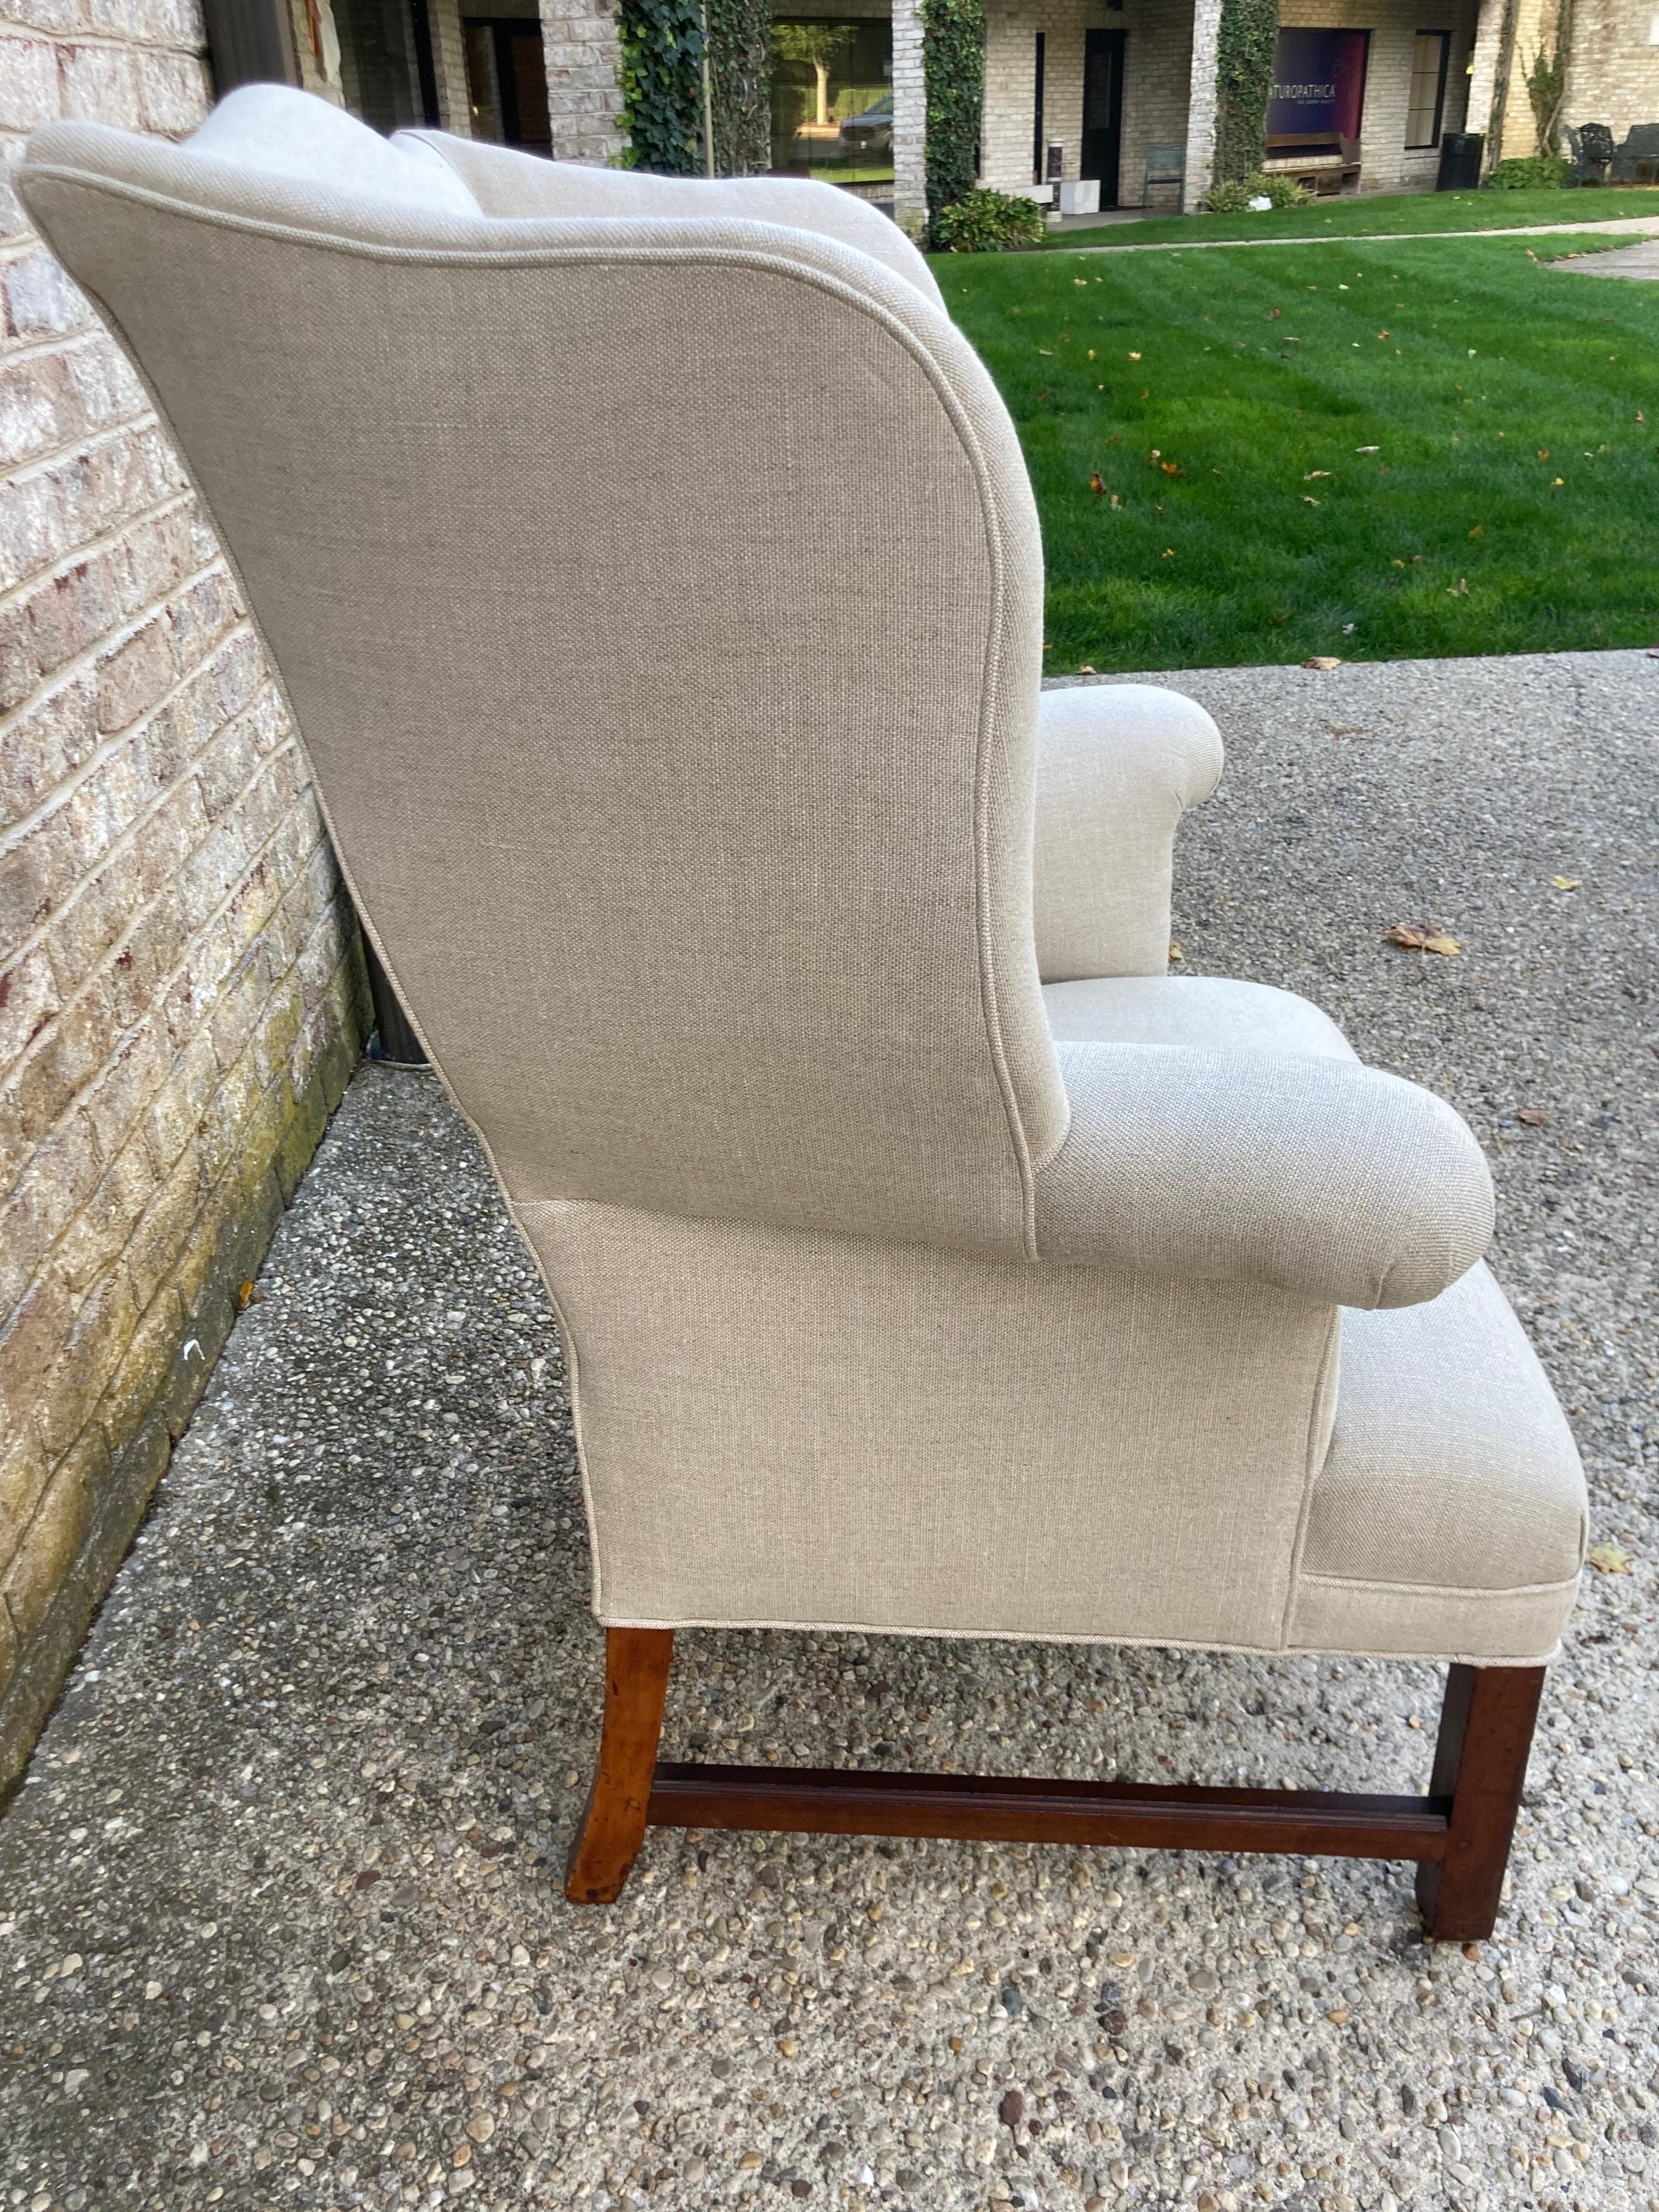 Great antique wingback chair with a tight seat. Newly reupholstered in natural linen. Chippendale style legs.